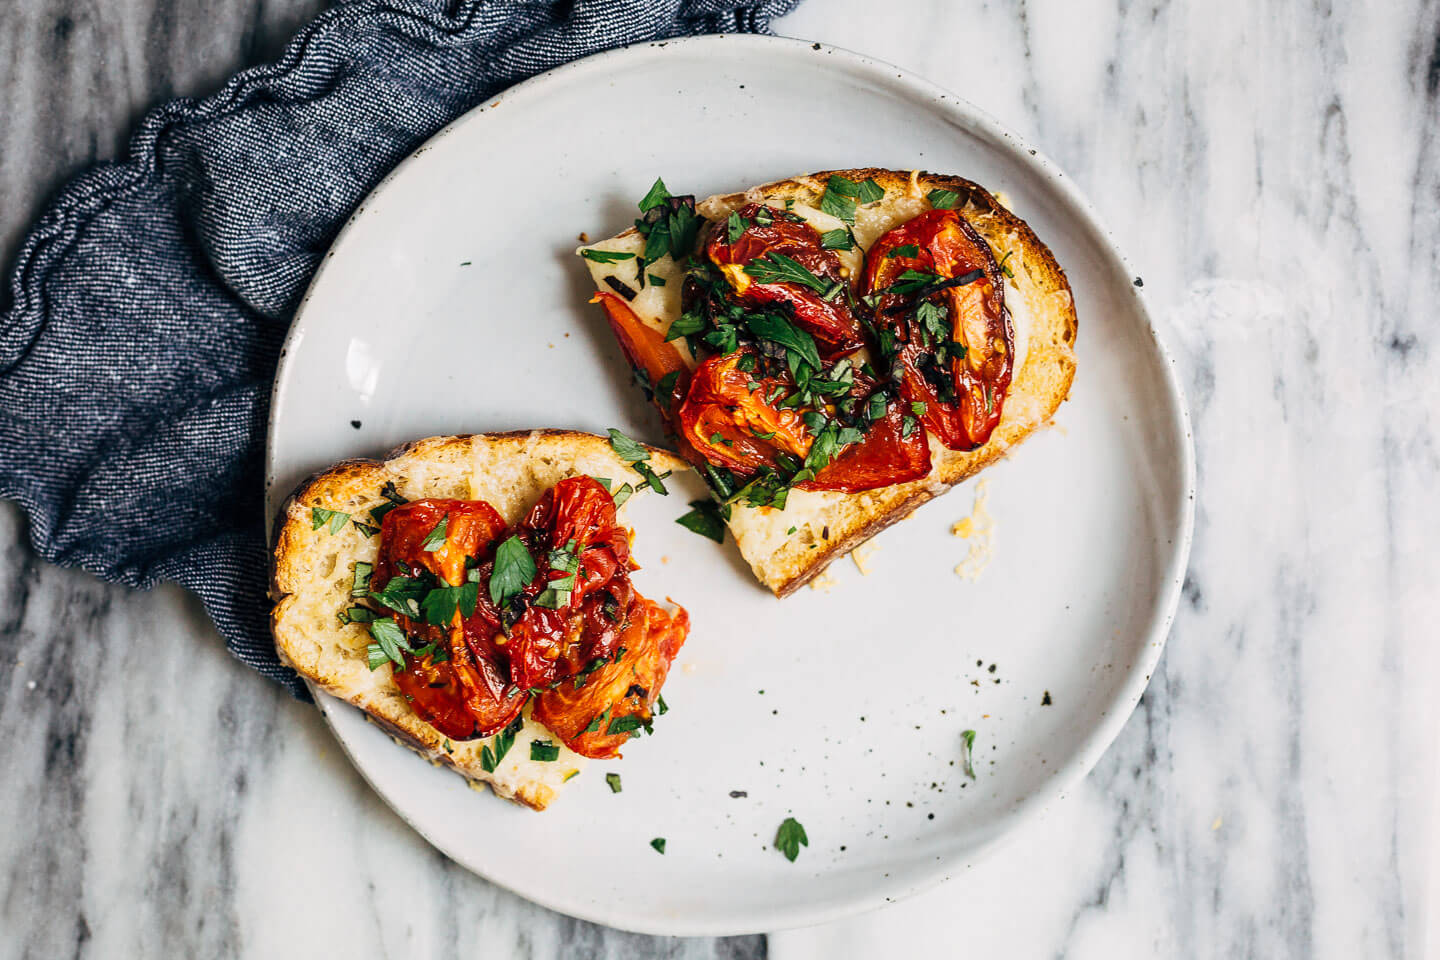 Celebrating the height of tomato season with sumptuous Gruyere and roasted tomato tartines made with thick-cut sourdough and punchy garlic butter.